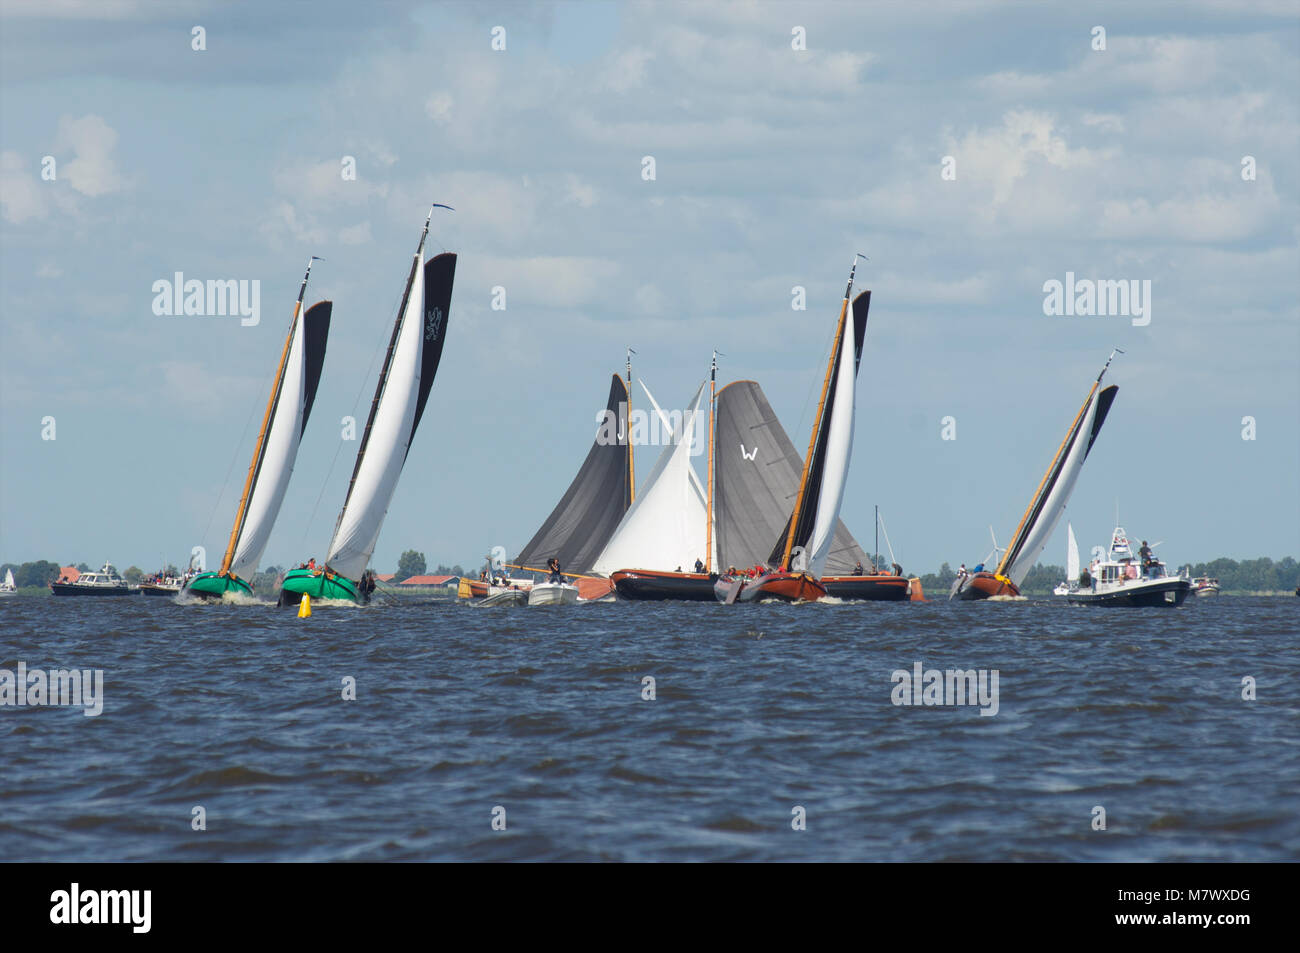 A traditional sailing race with classic Dutch wooden flat-bottemend boats on the lakes in Frisia, The Netherlands Stock Photo